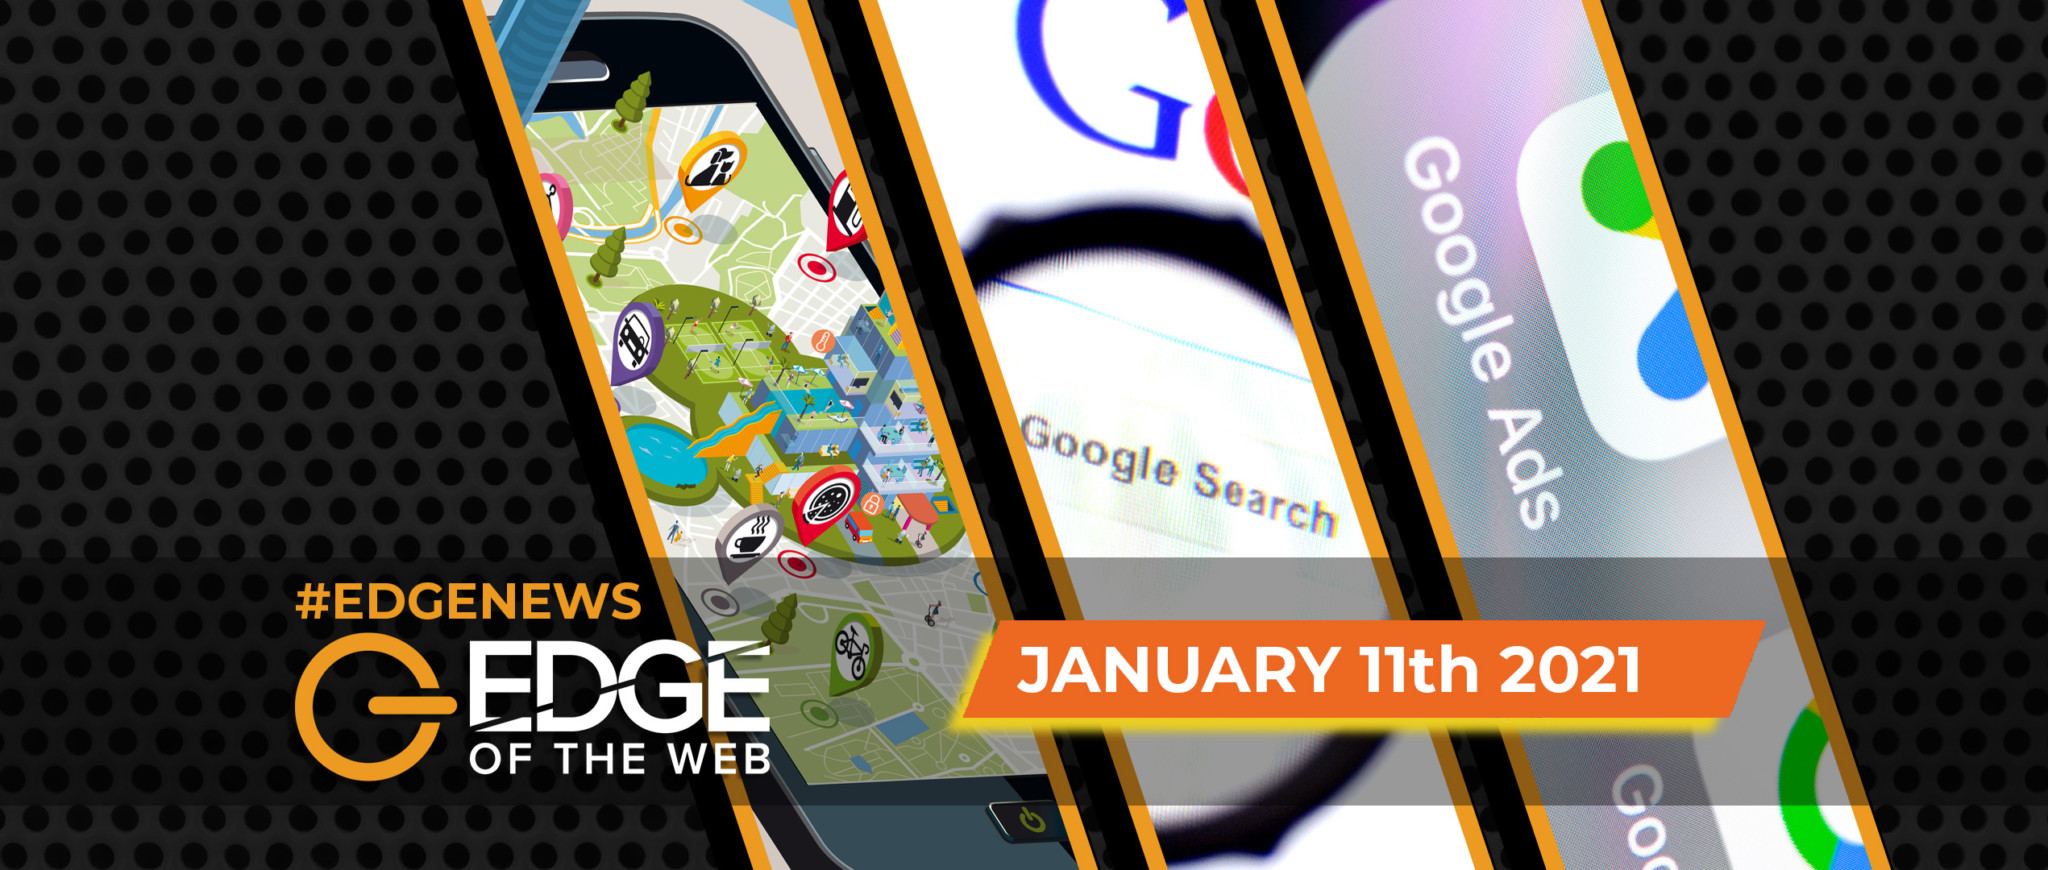 EDGE News Featured Image January 11th